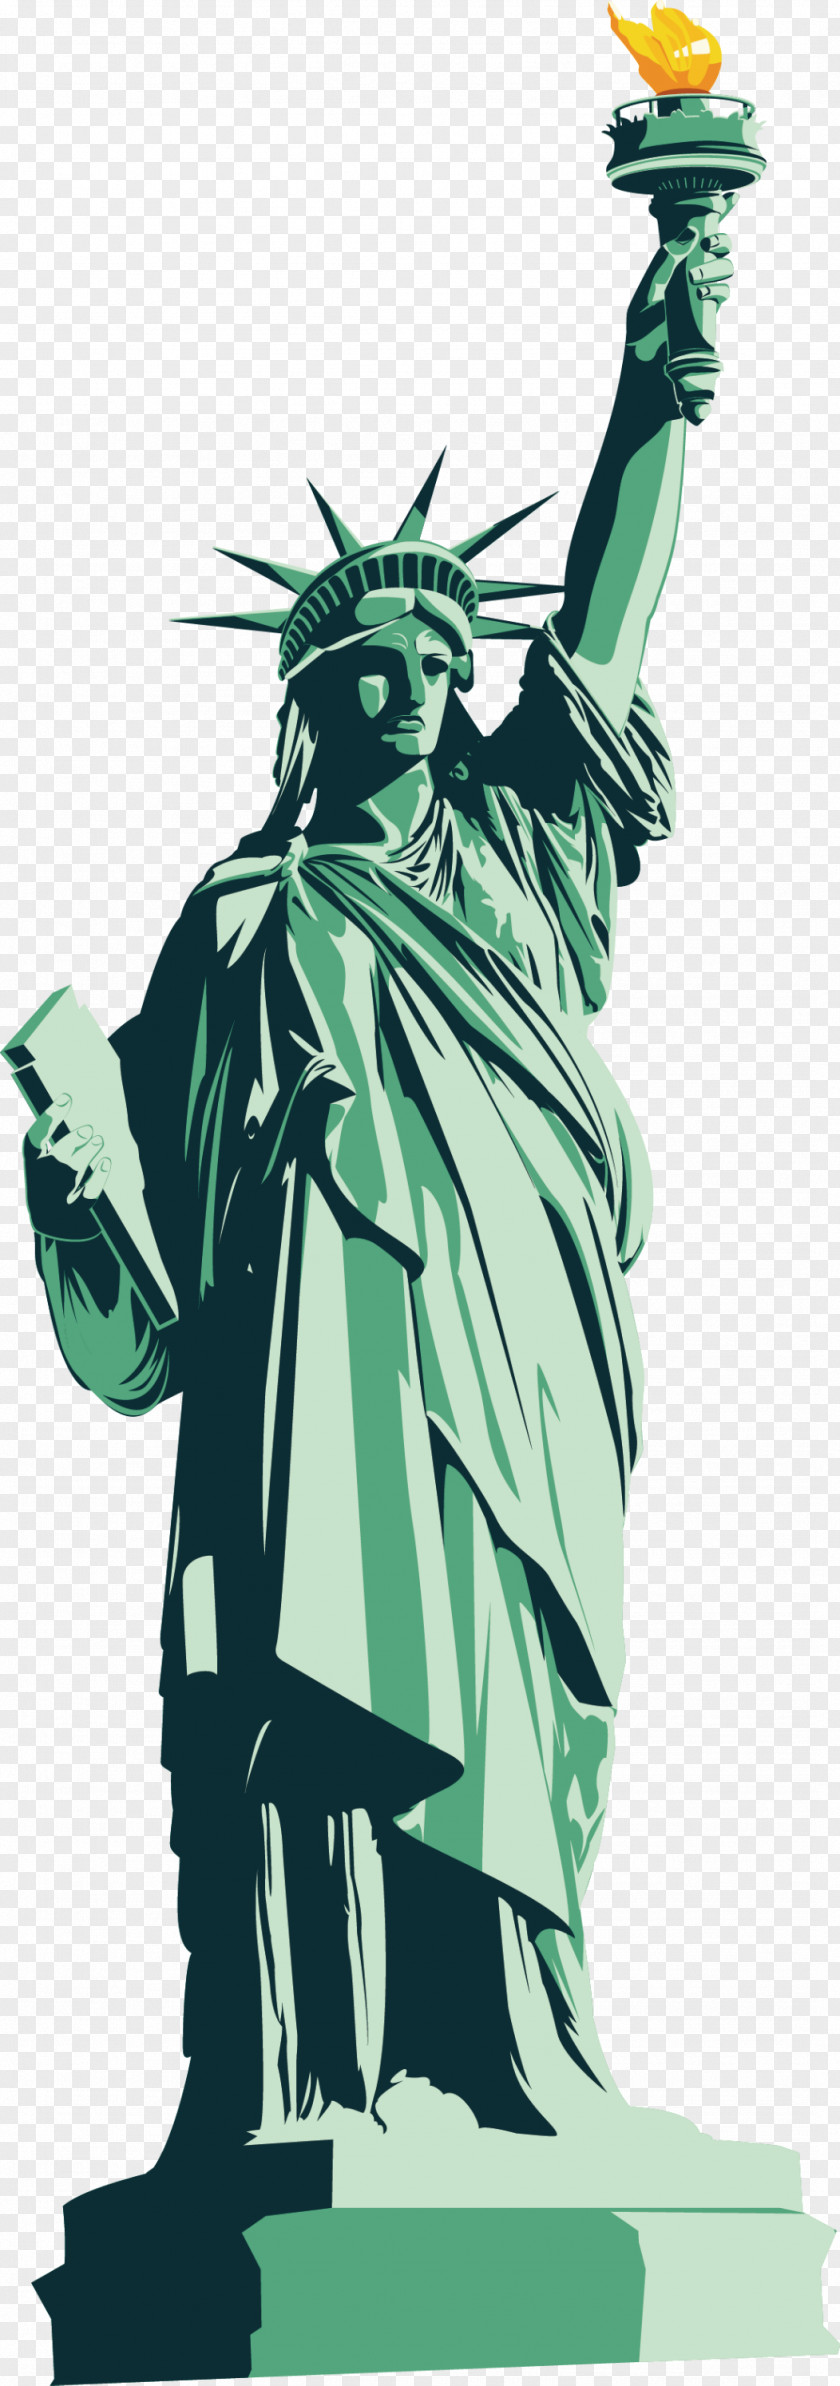 Statue Of Liberty National Monument Vector Graphics Image Illustration PNG